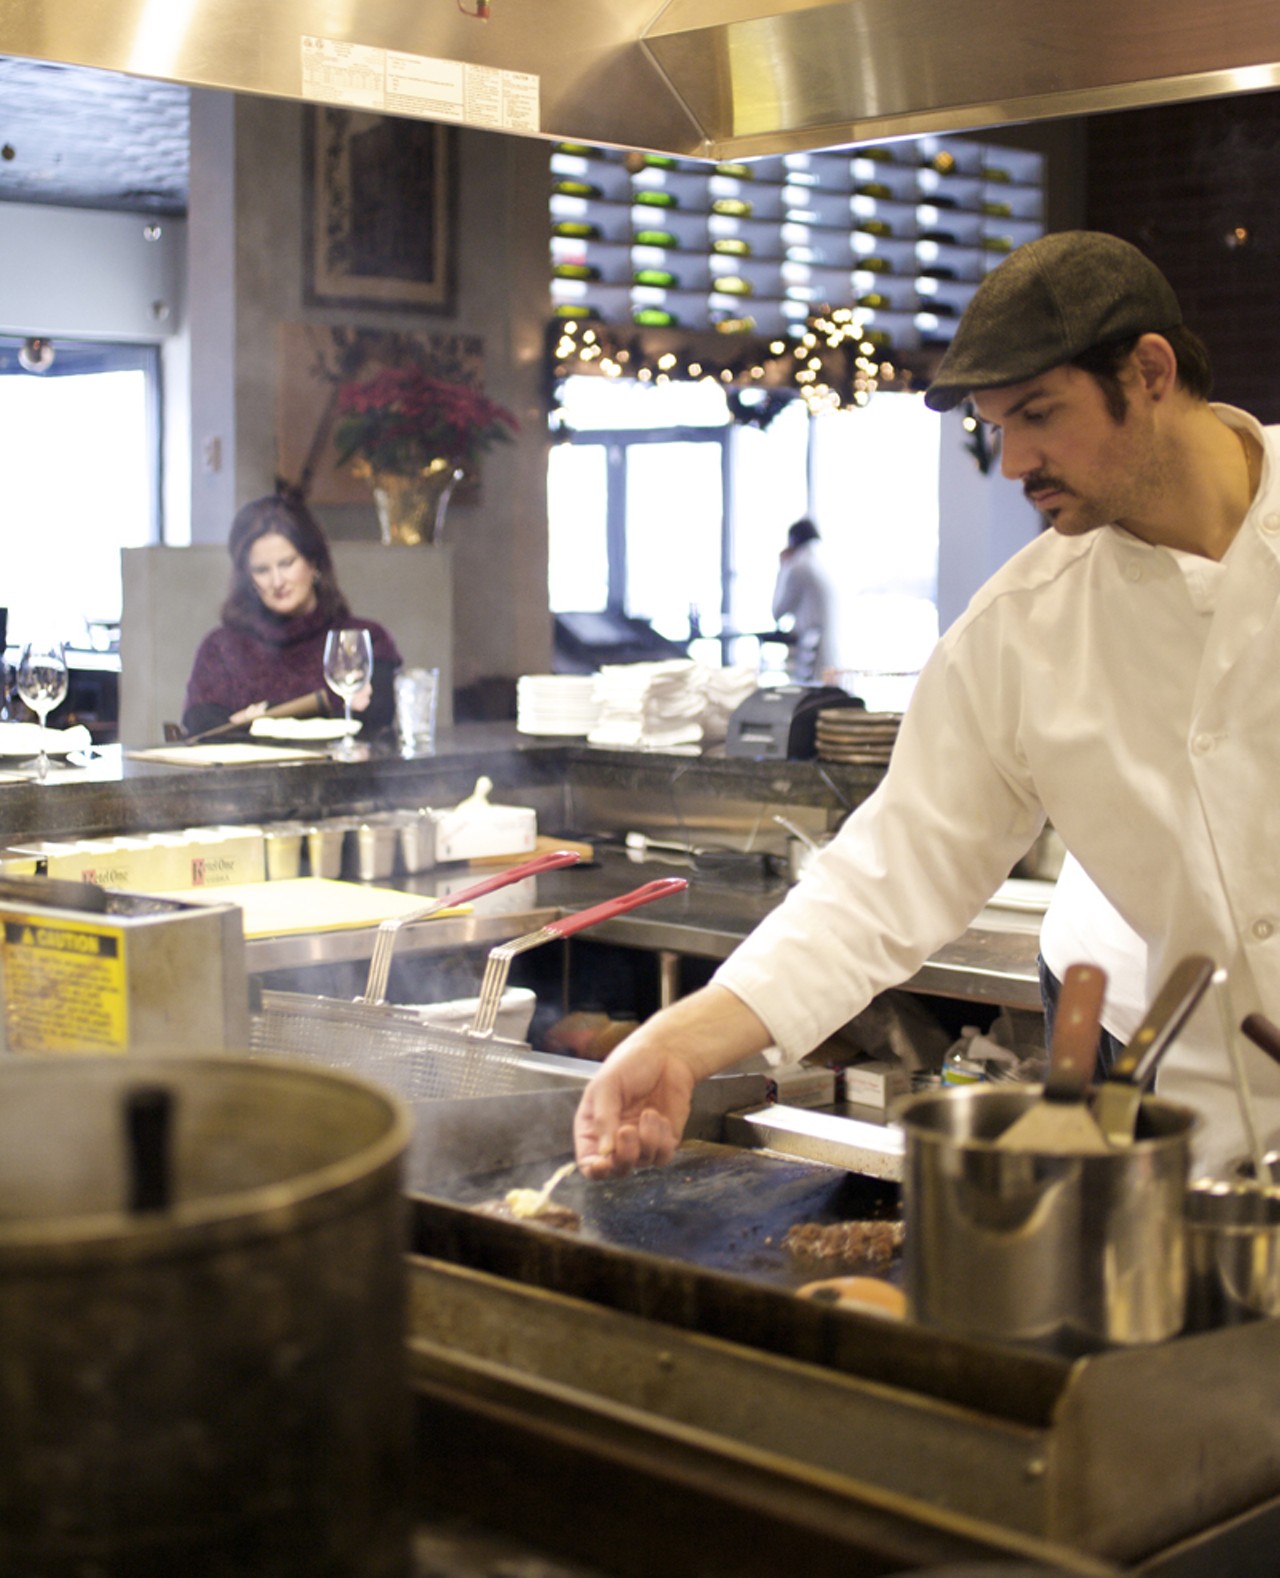 Chef de Cuisine Jeff Hubbard at work in the open kitchen at the Tavern Kitchen & Bar.